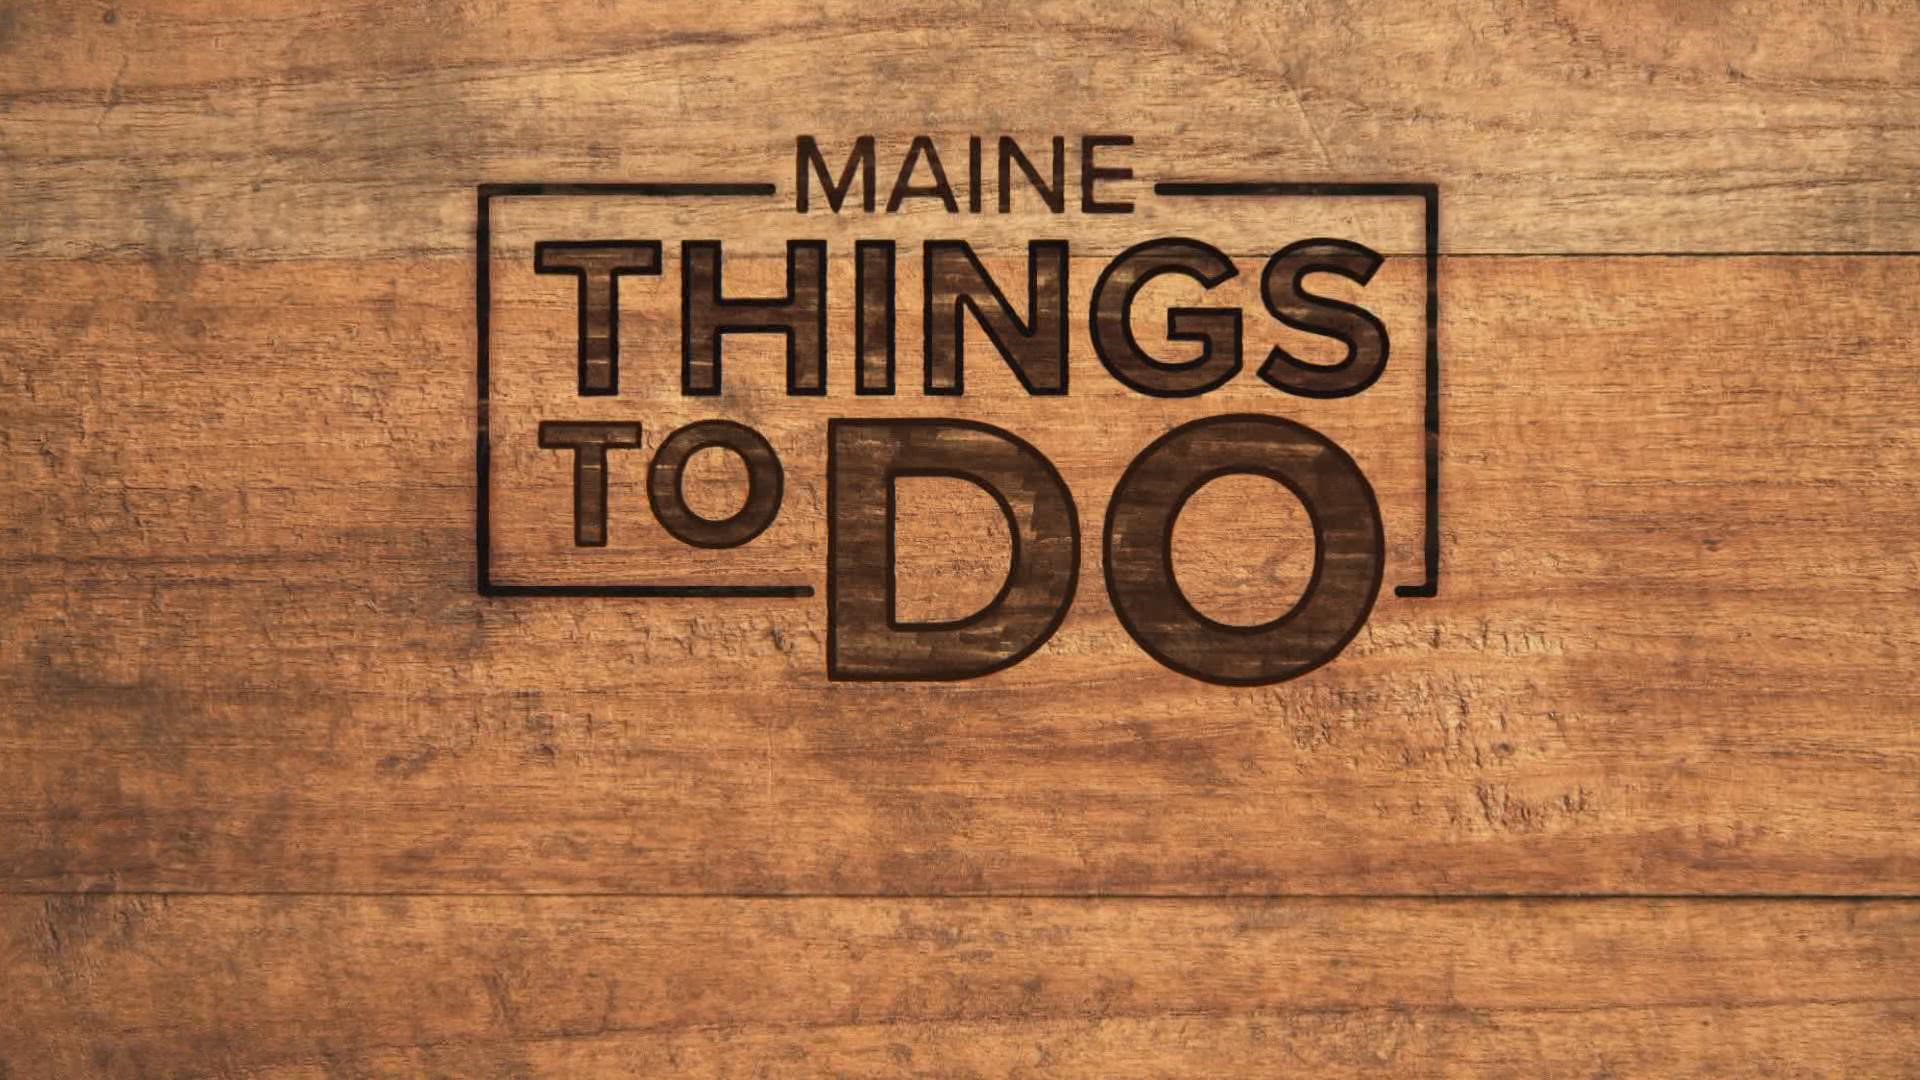 From the Clam Festival to chicken pot pies to go, there's plenty to do & eat this week in Maine.